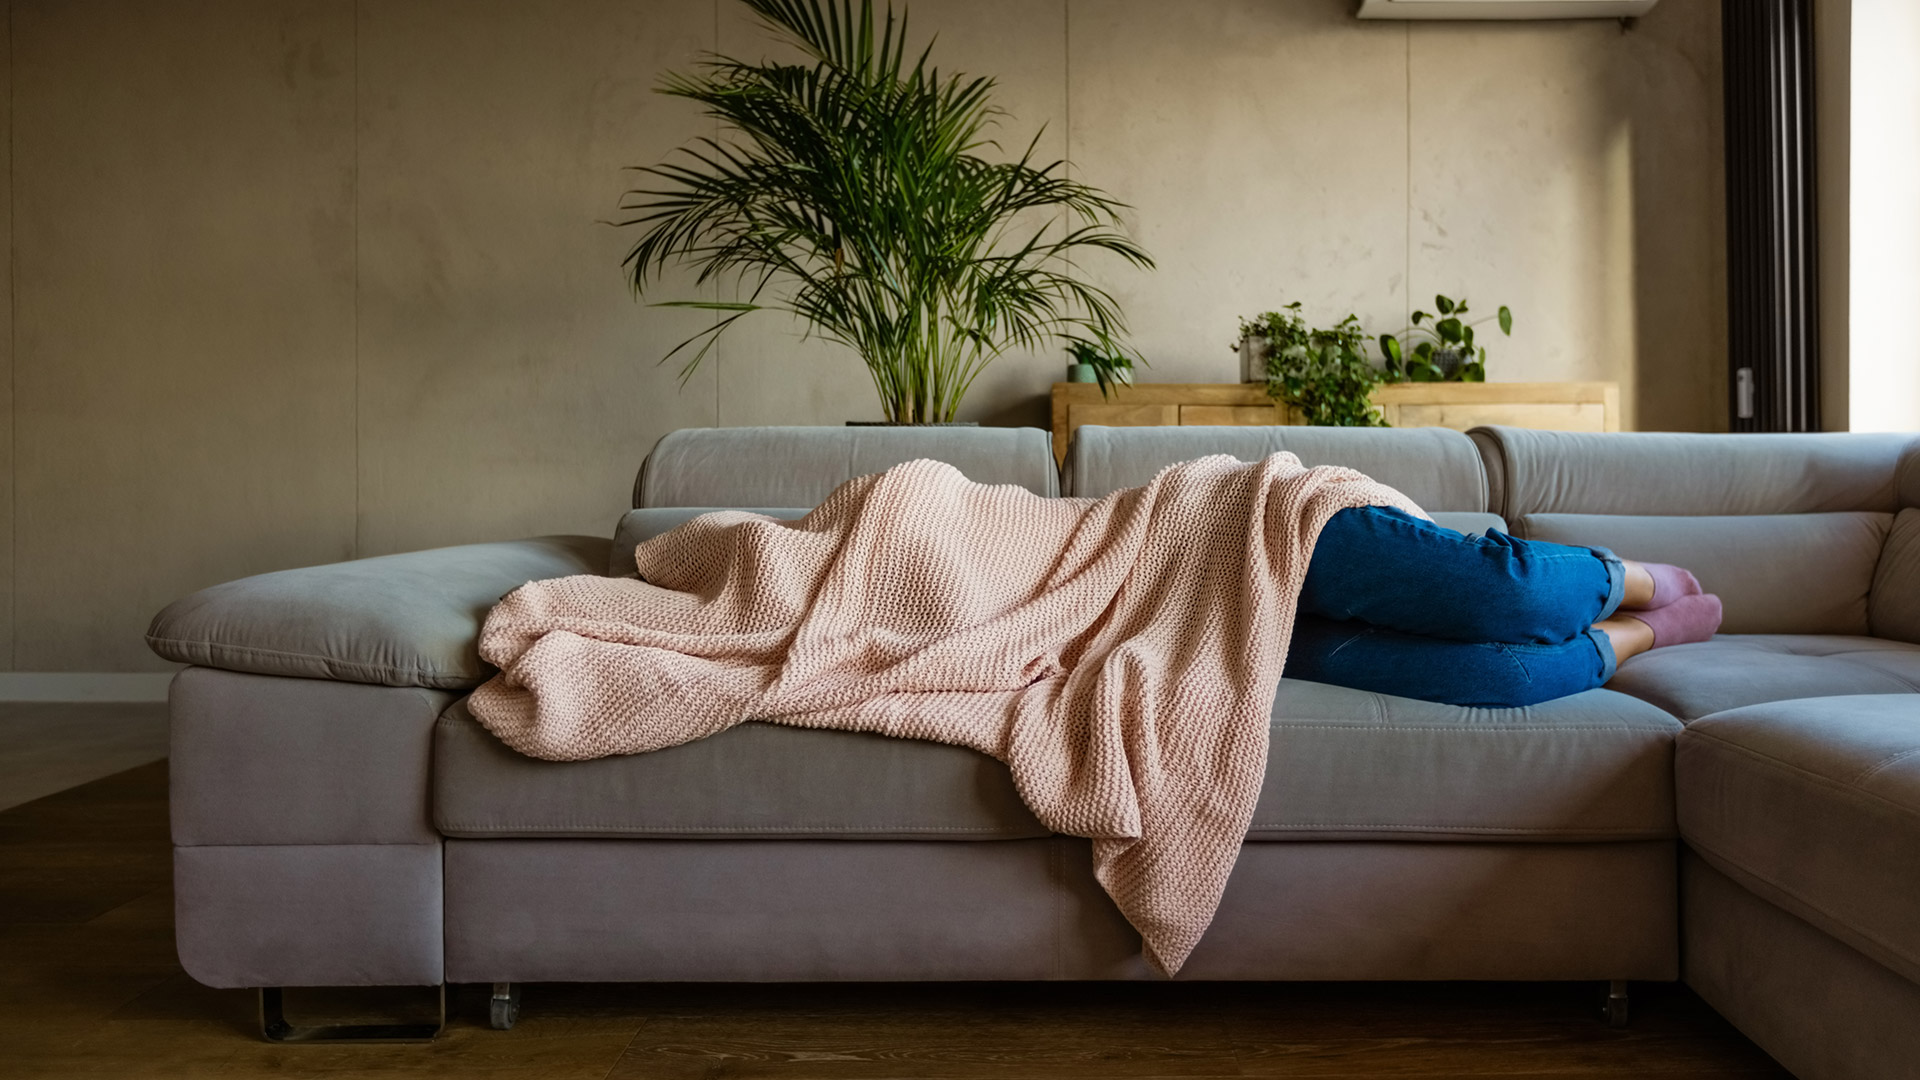 Young woman lying down on sofa in living room covered by blanket. Unrecognizable person.